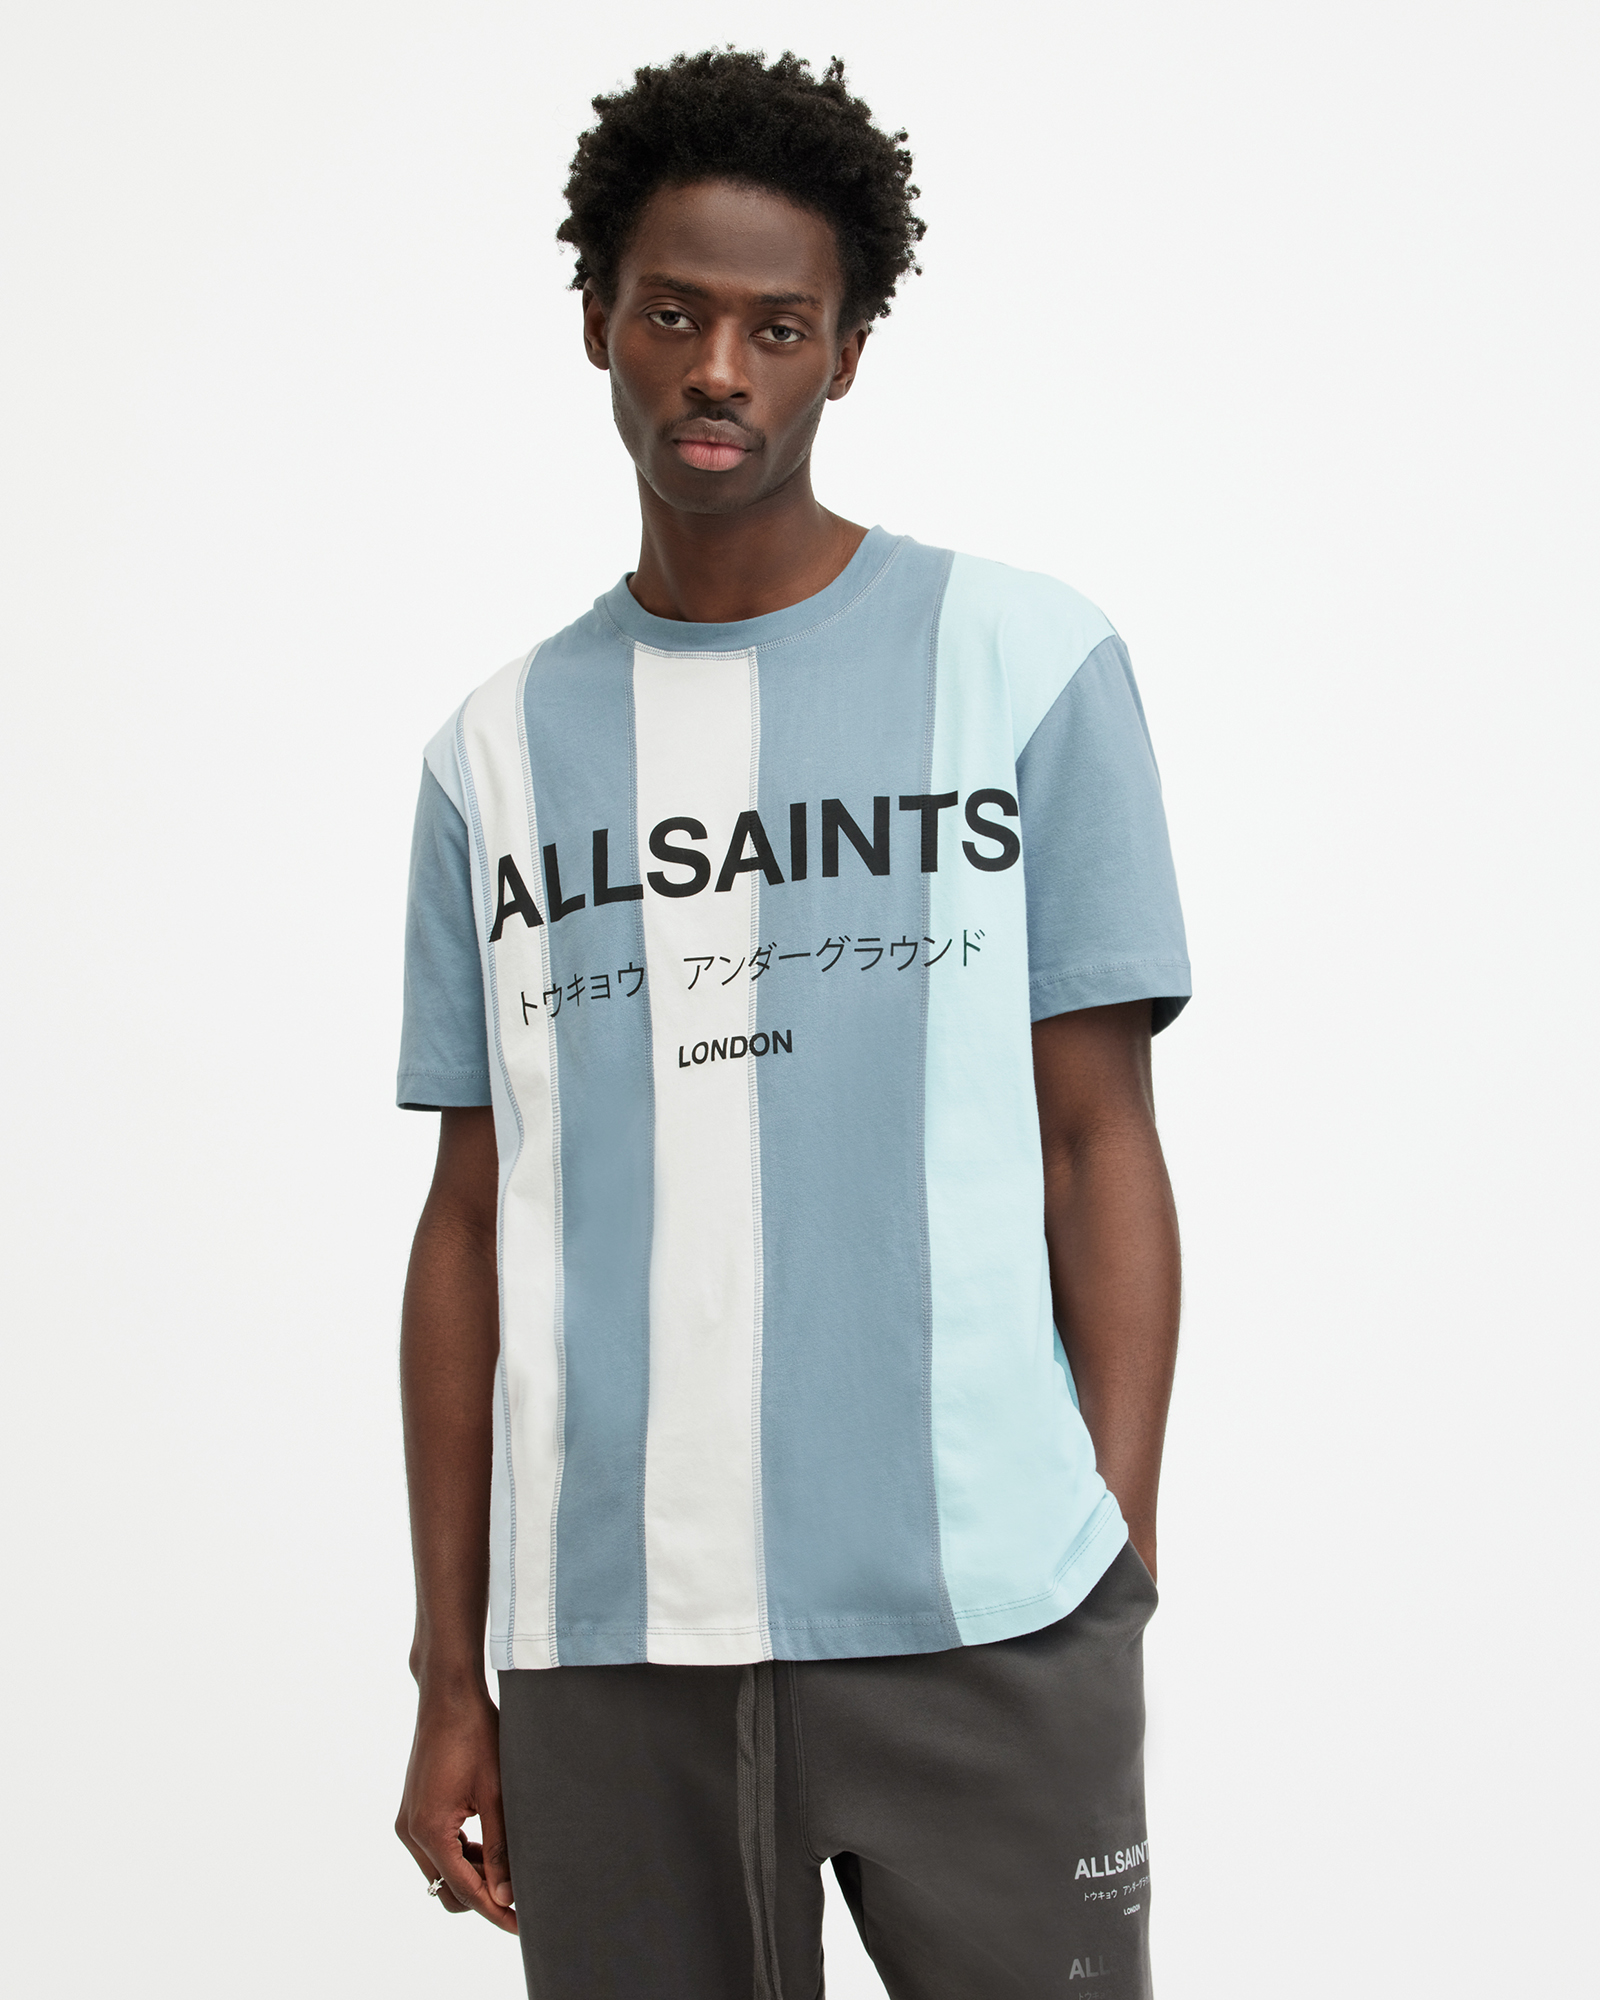 AllSaints Repurpose Underground Relaxed Fit T-Shirt,, BLUE/BLUE/WHITE